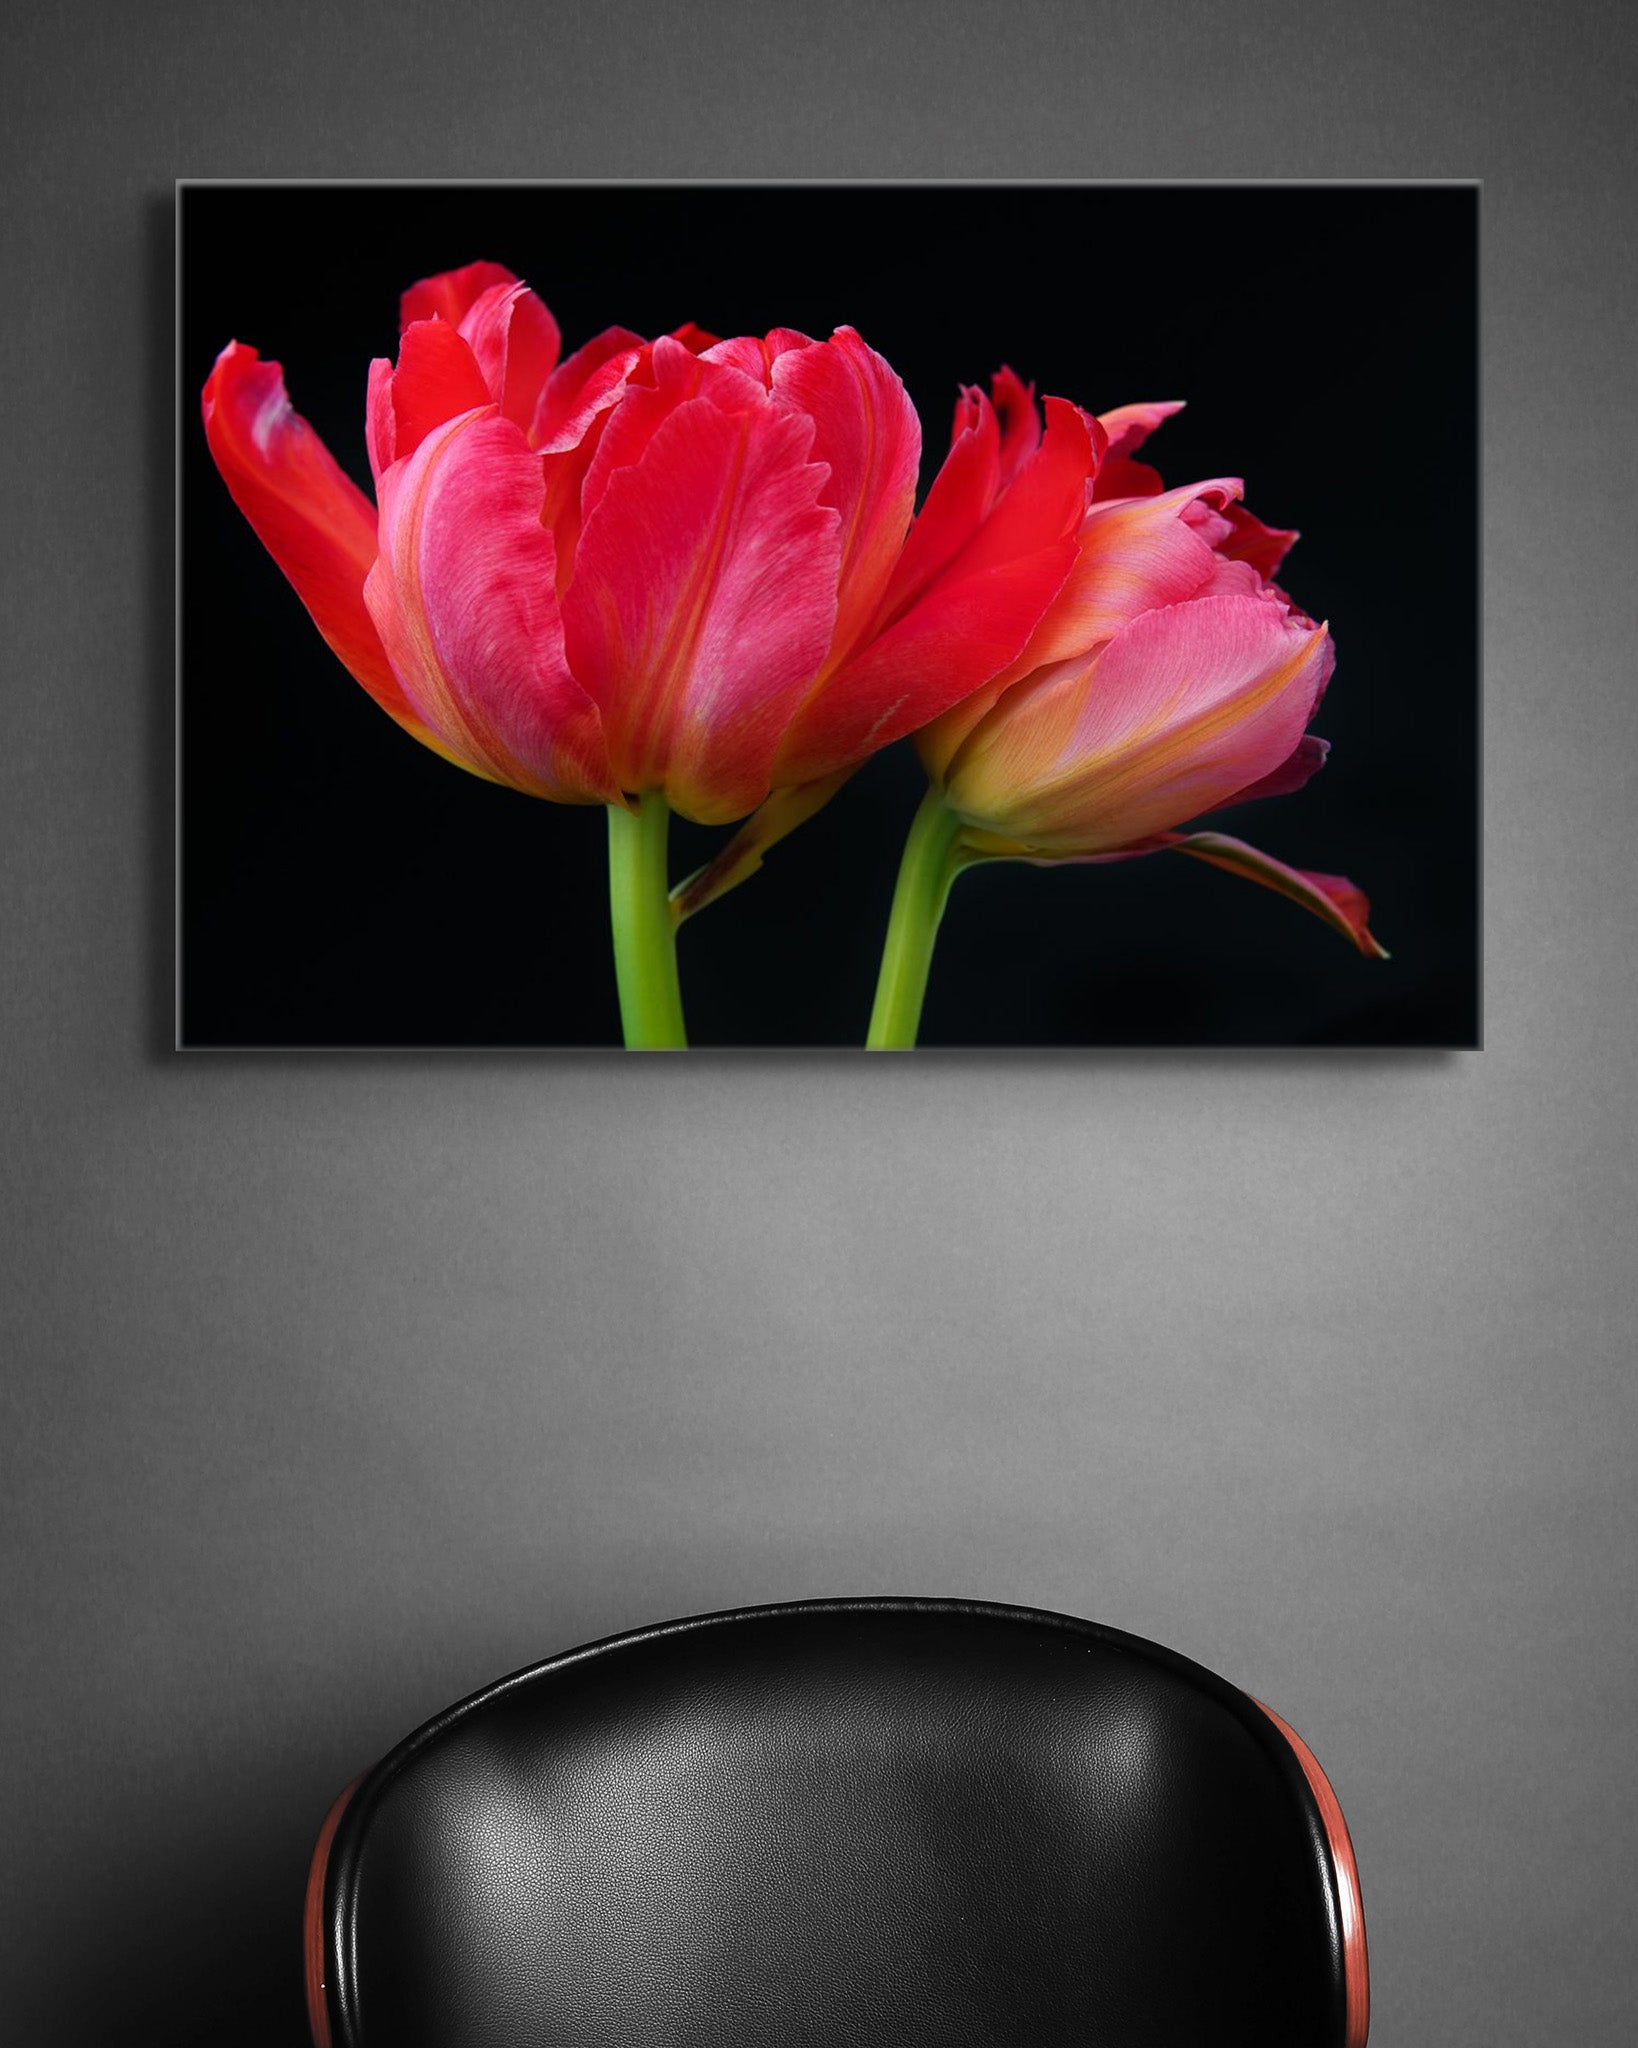 A picture on the wall of a room. The picture is a flower photograph called "Is it Dark Out" by Cameron Dreaux.